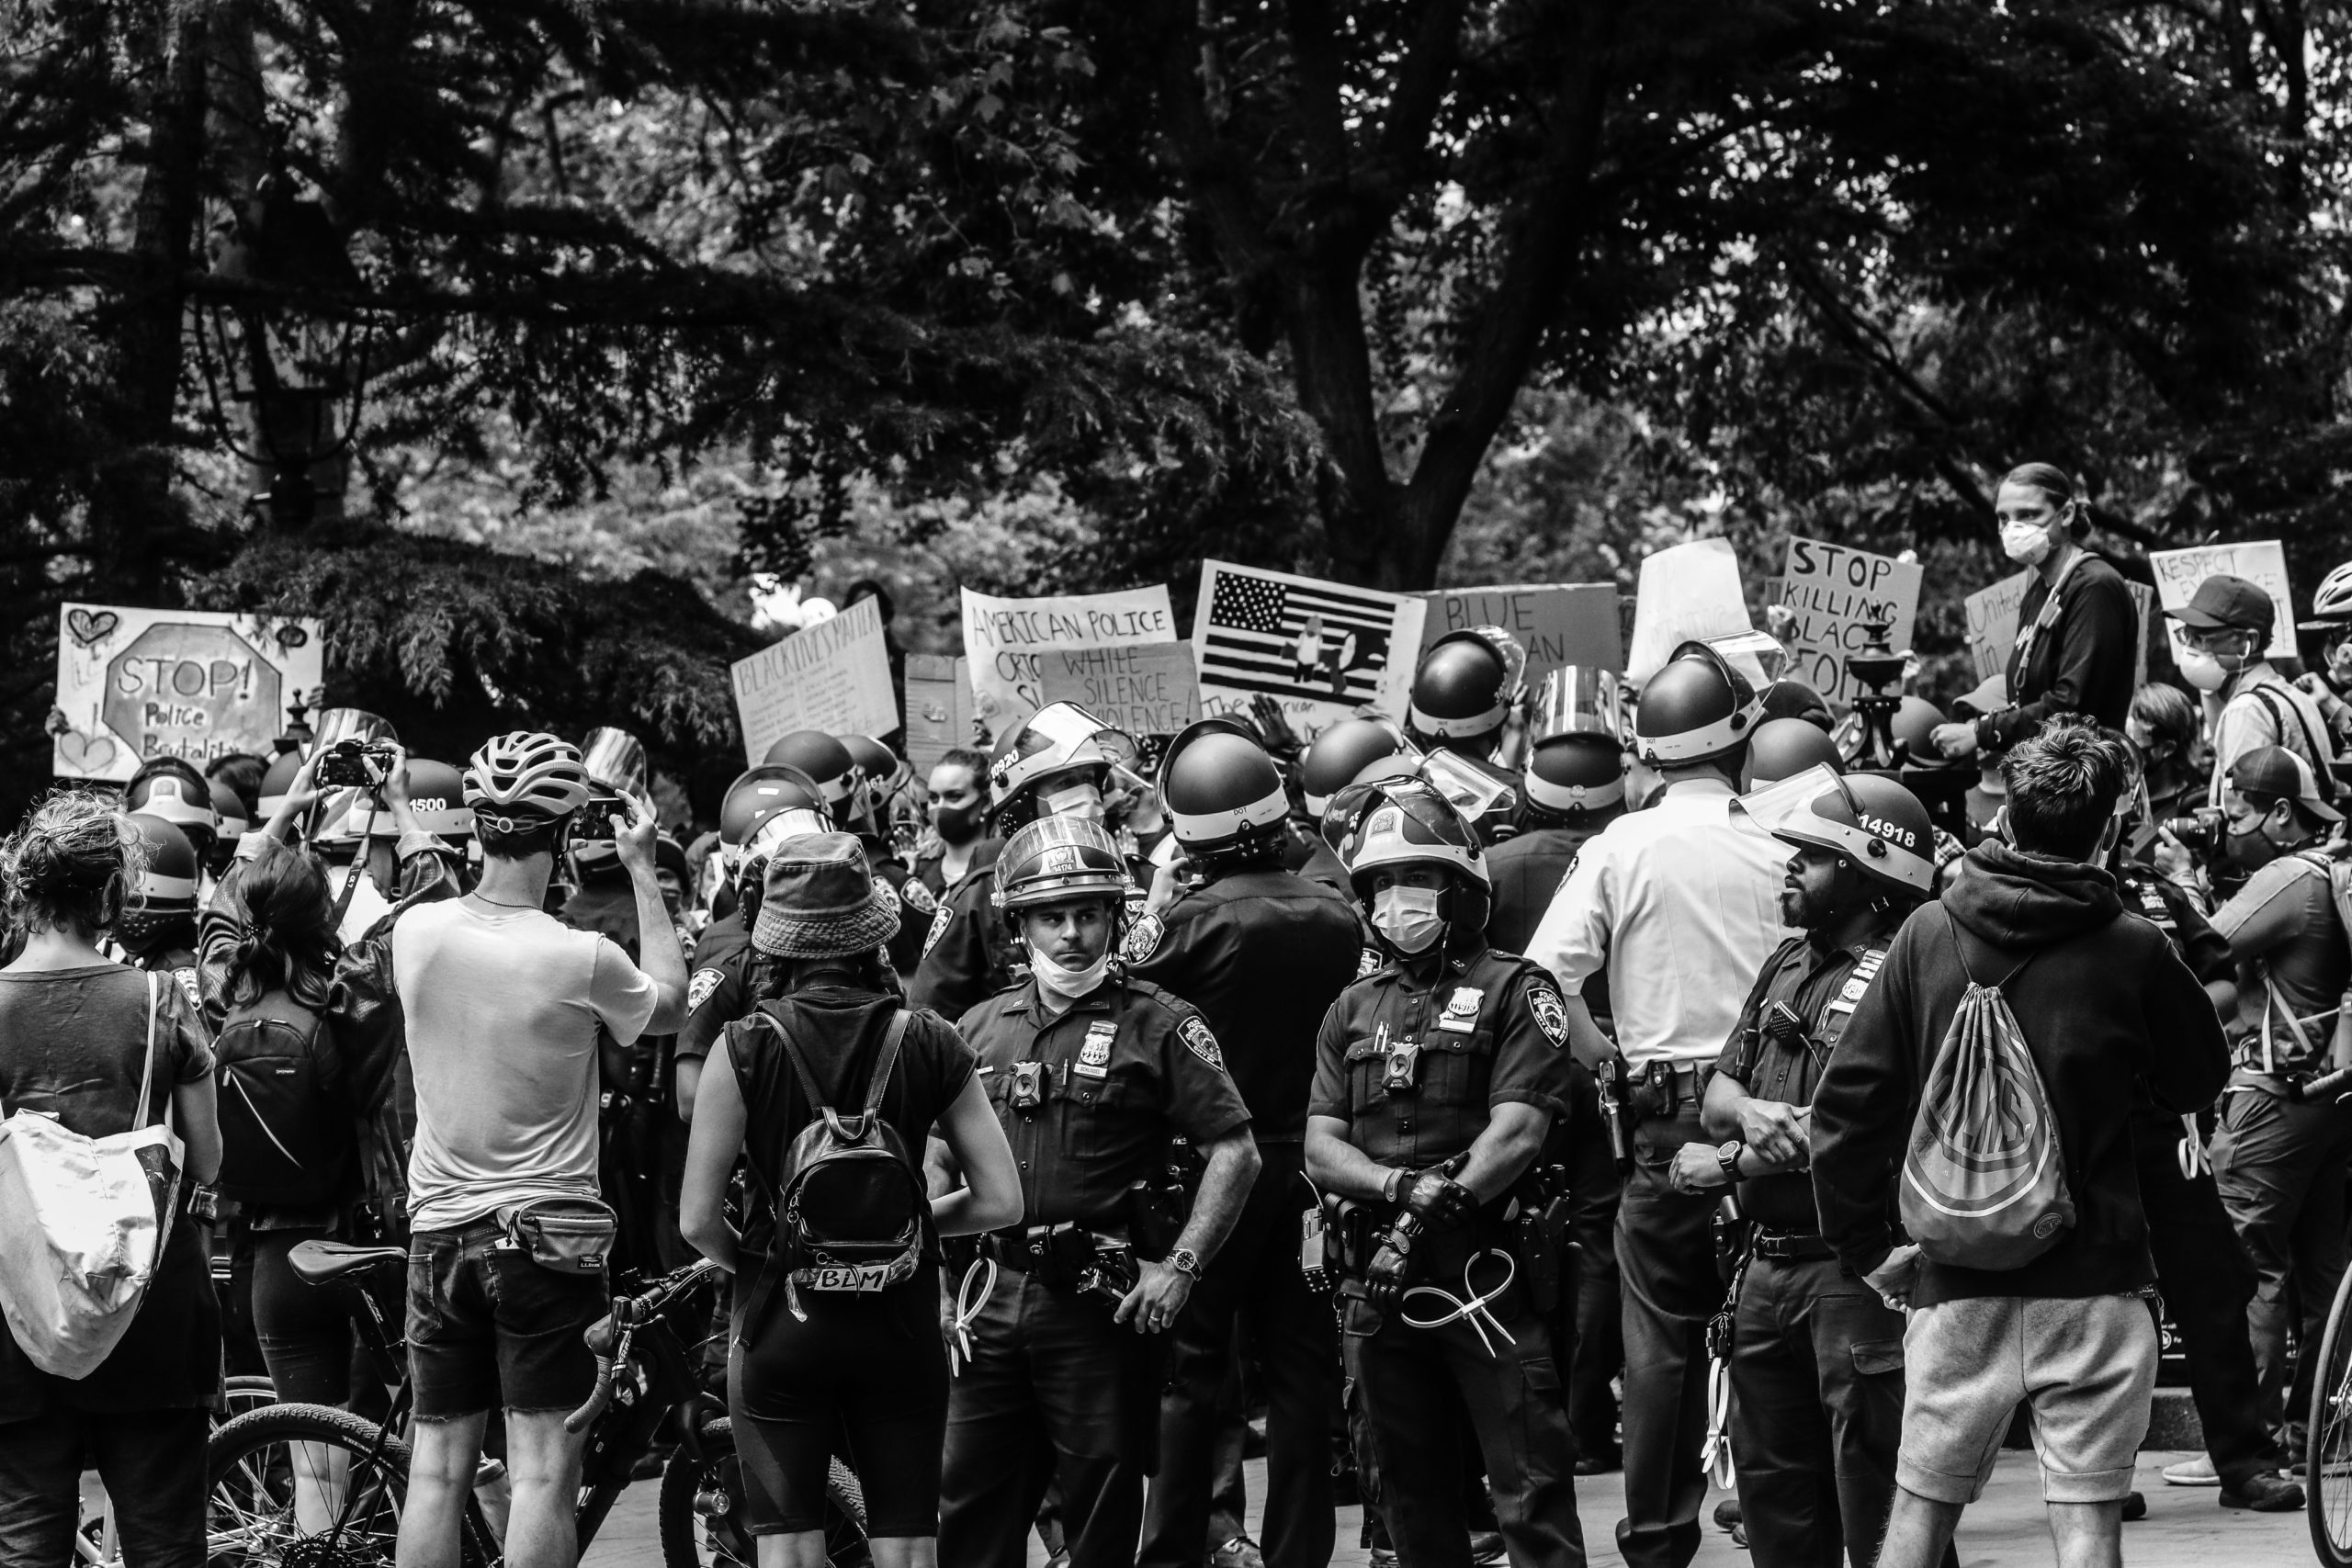 For Any Meaningful Police Reform, We Need to Curb the Power of Police Unions